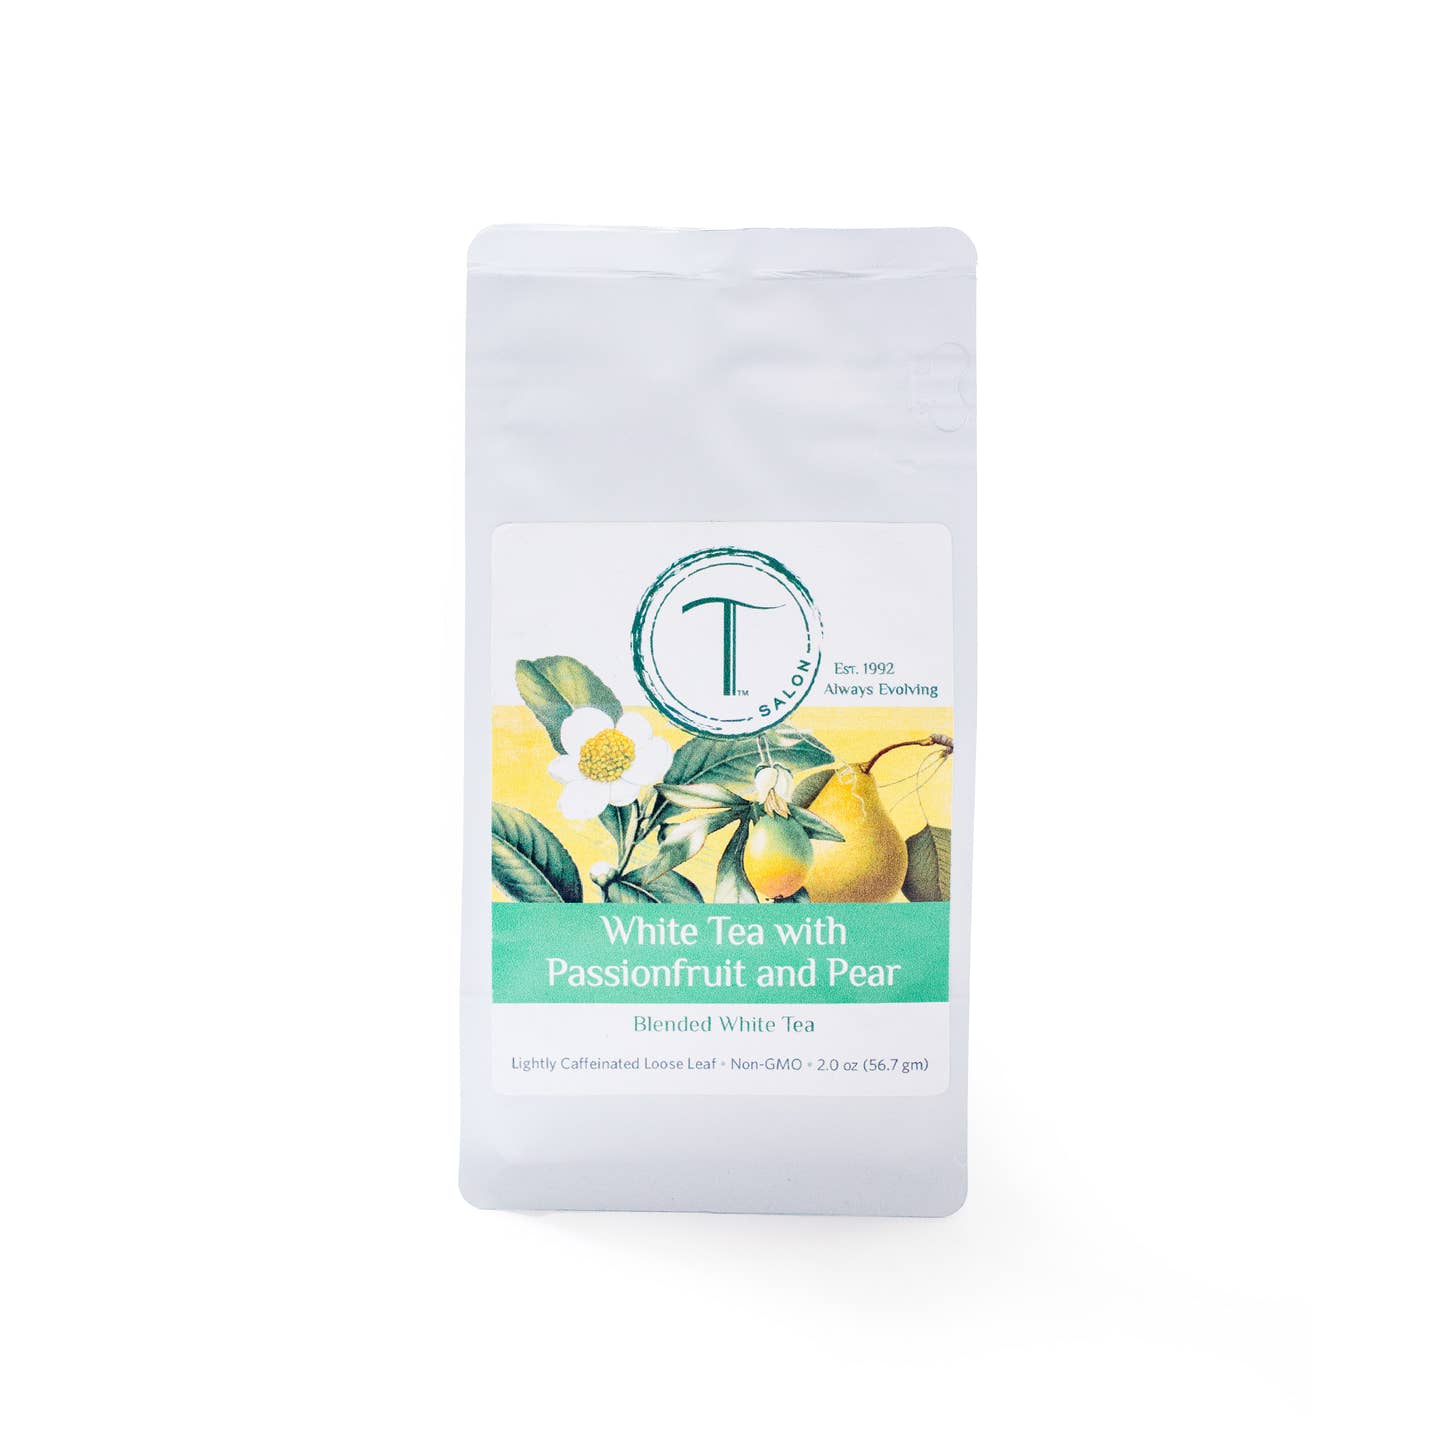 White Tea with Passionfruit and Pear